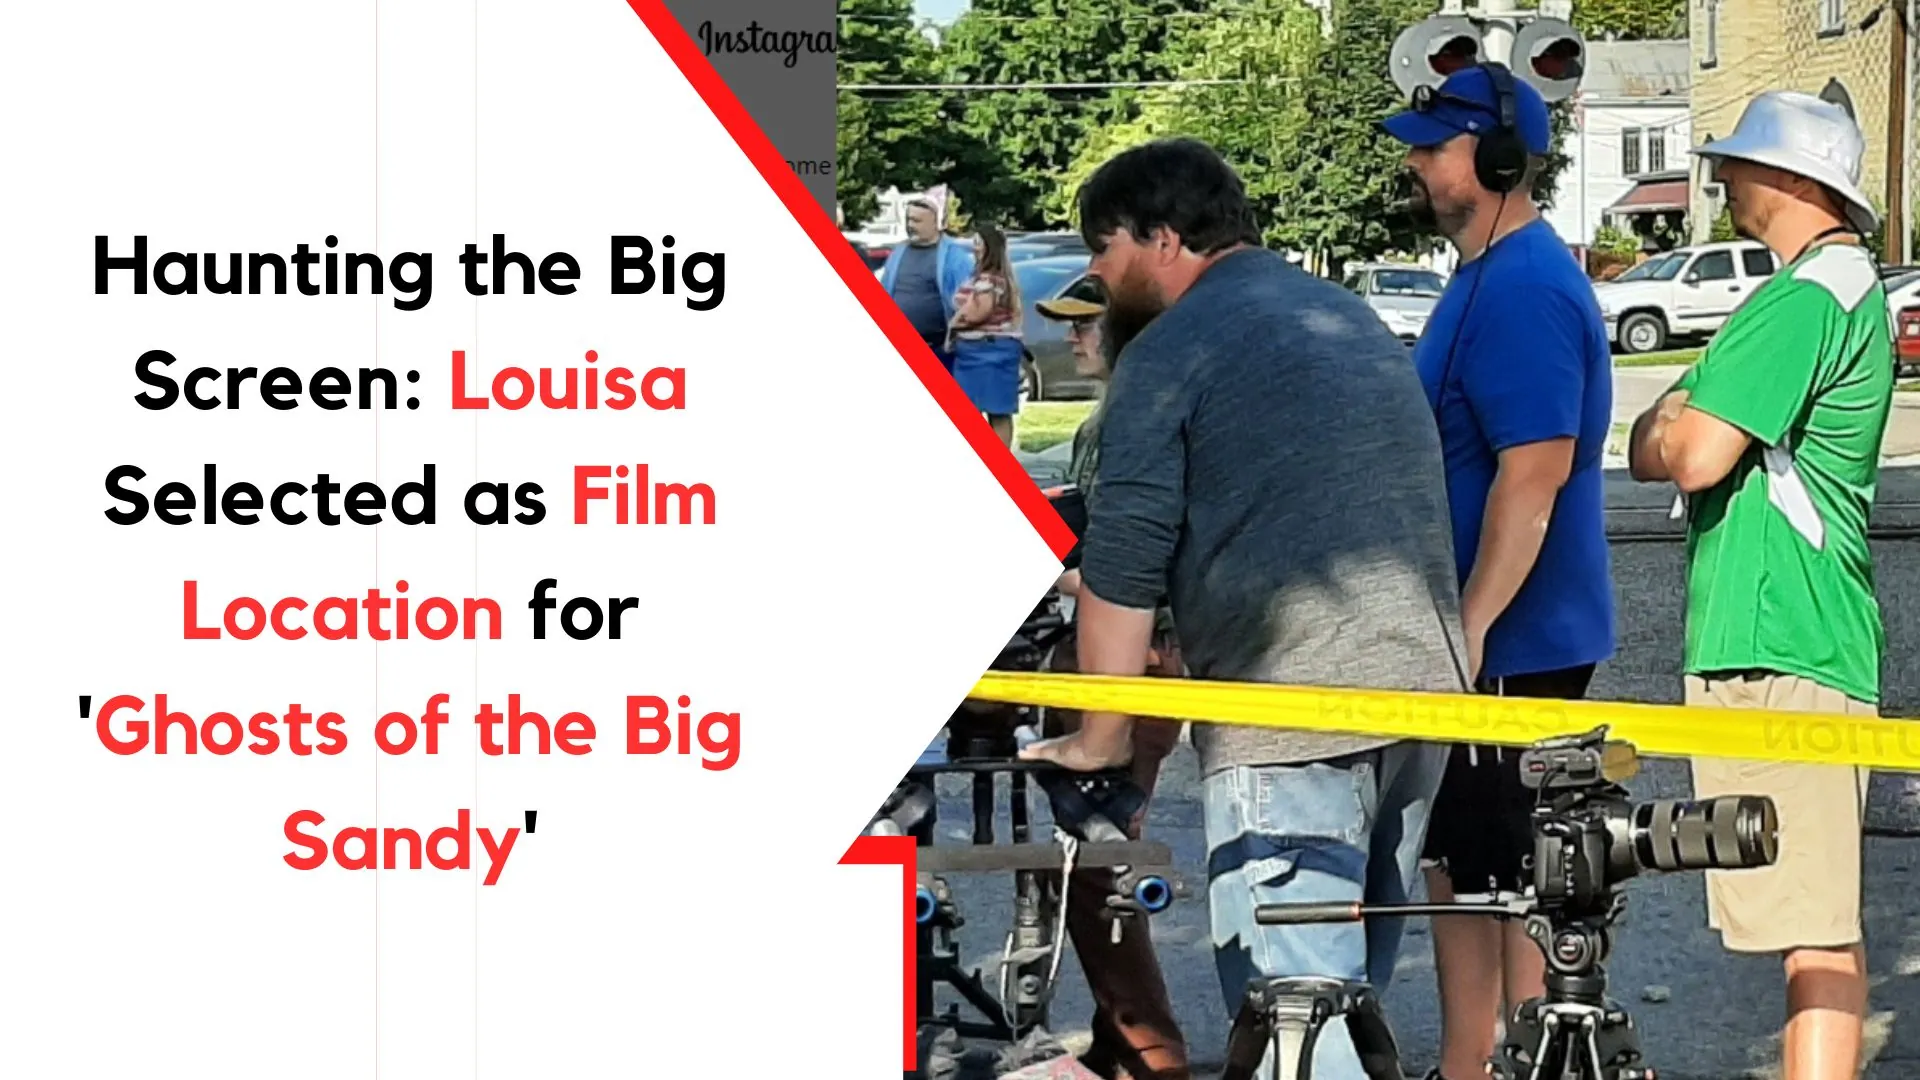 Haunting the Big Screen: Louisa Selected as Film Location for 'Ghosts of the Big Sandy'